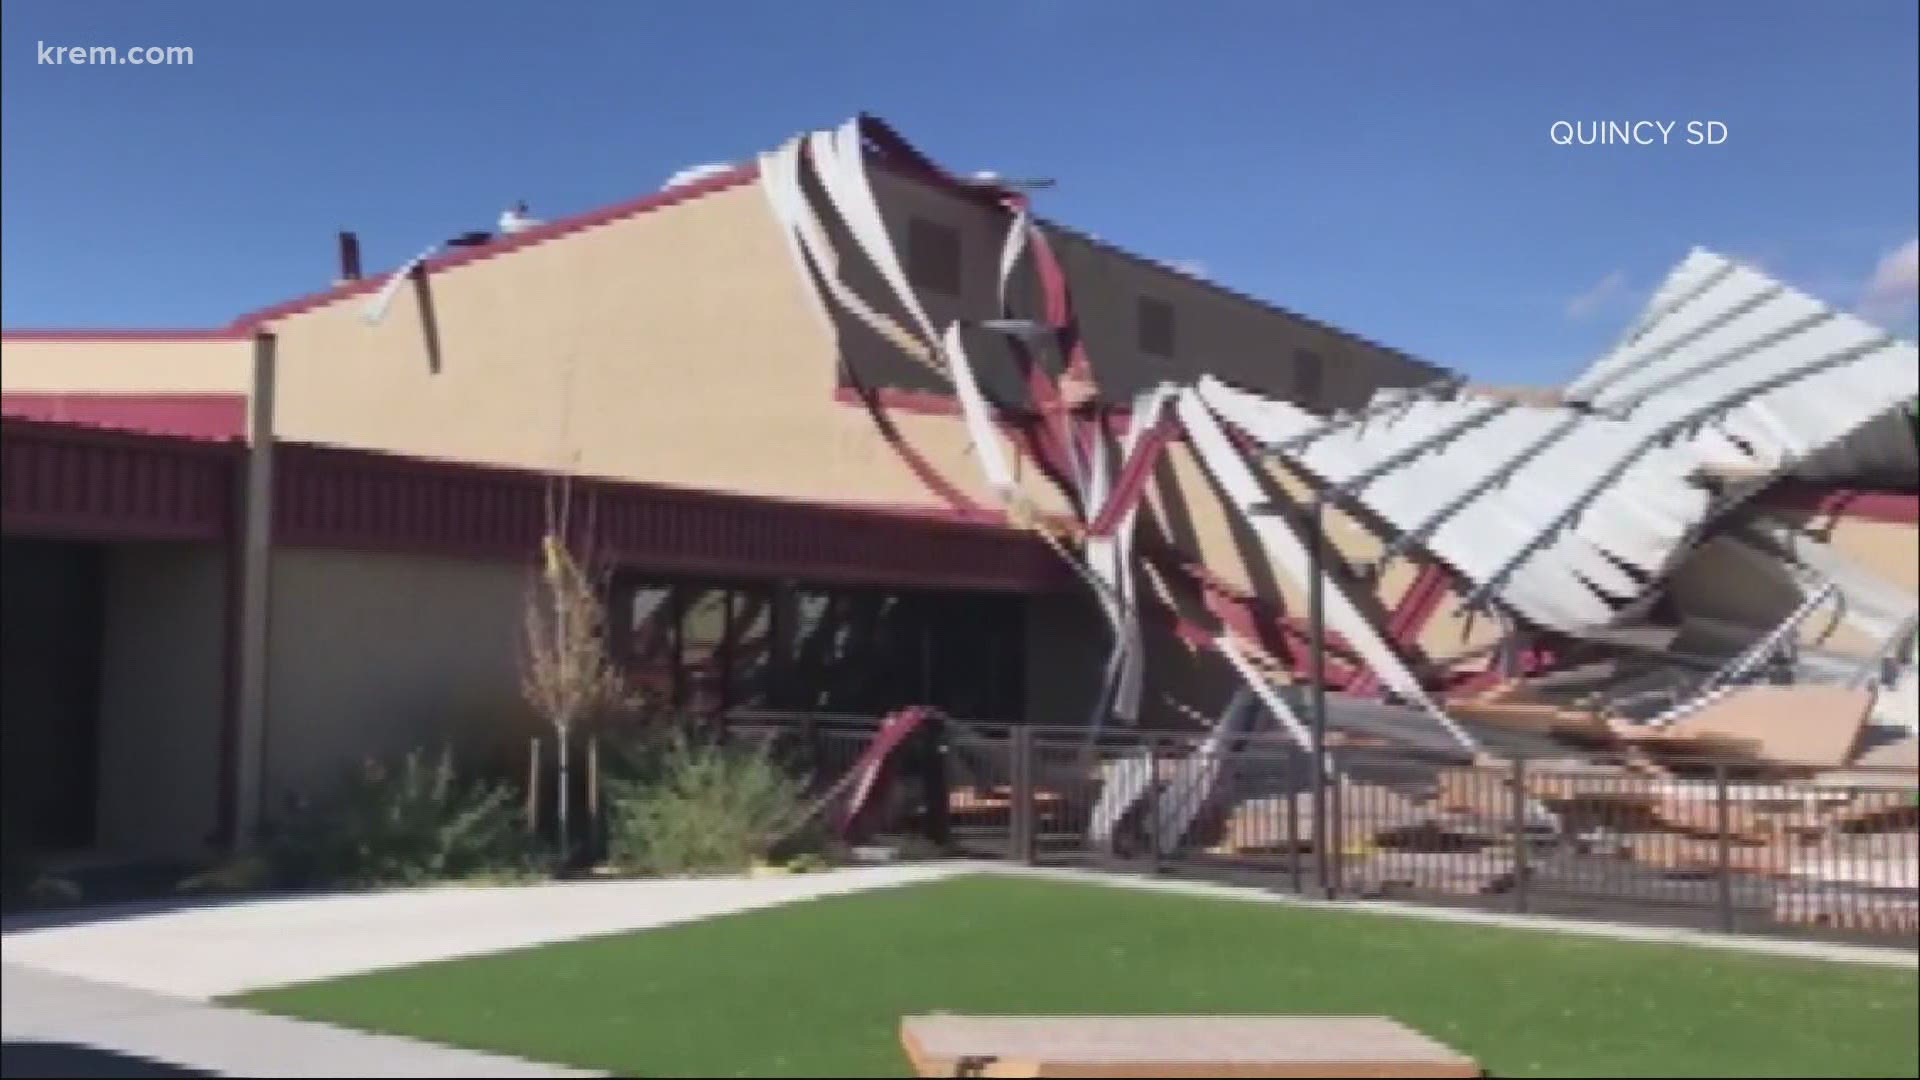 Teachers were inside Ancient Lake Elementary School when the roof blew off but no one was hurt.